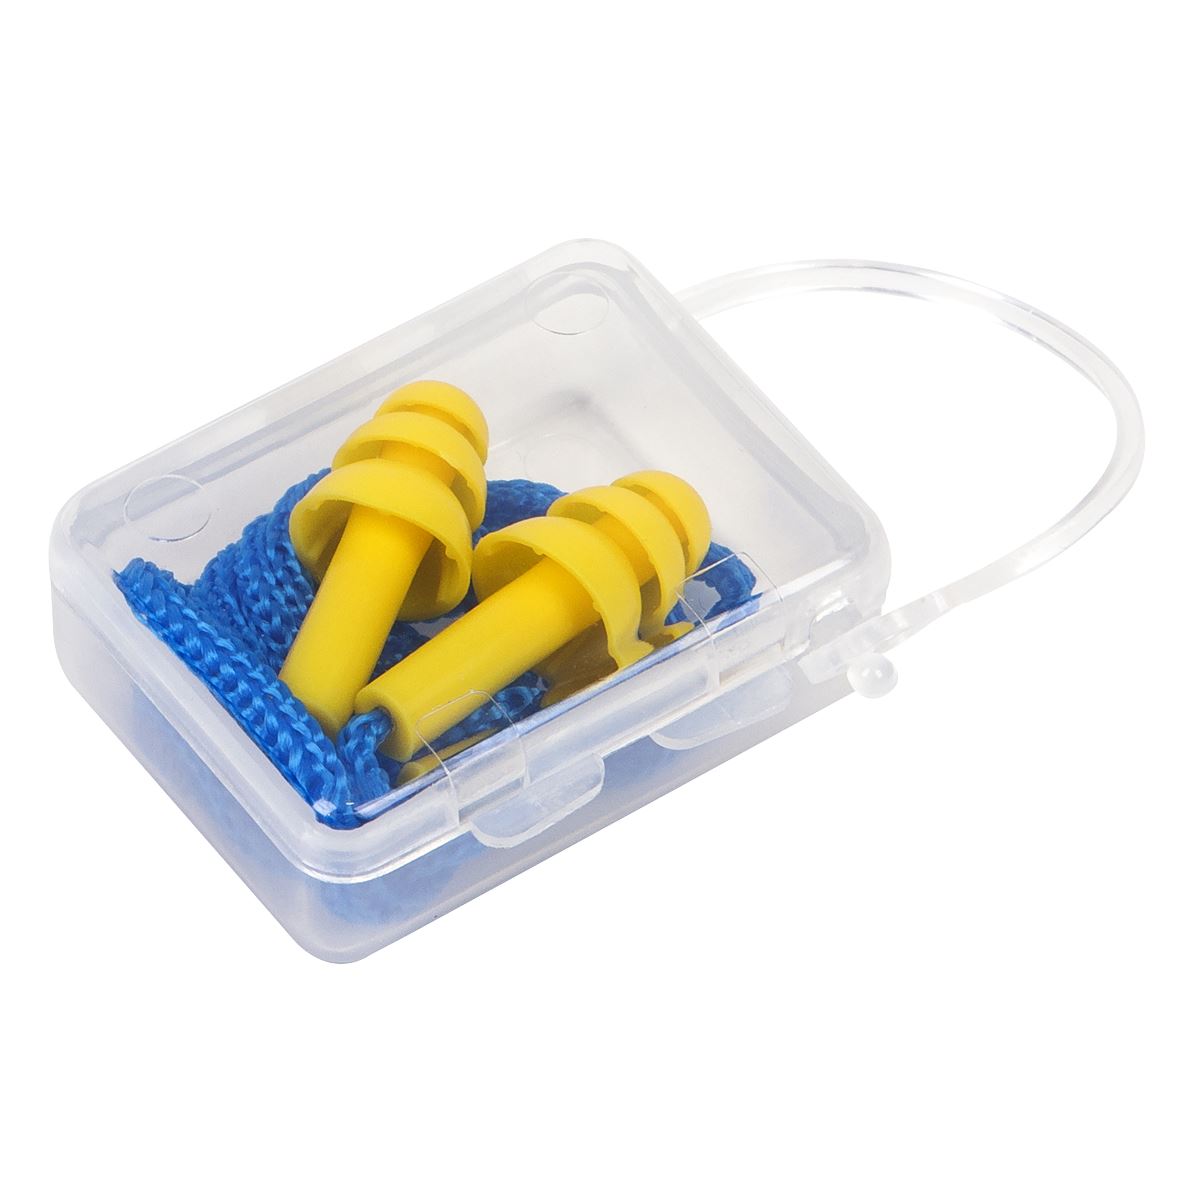 Worksafe by Sealey Corded Ear Plugs